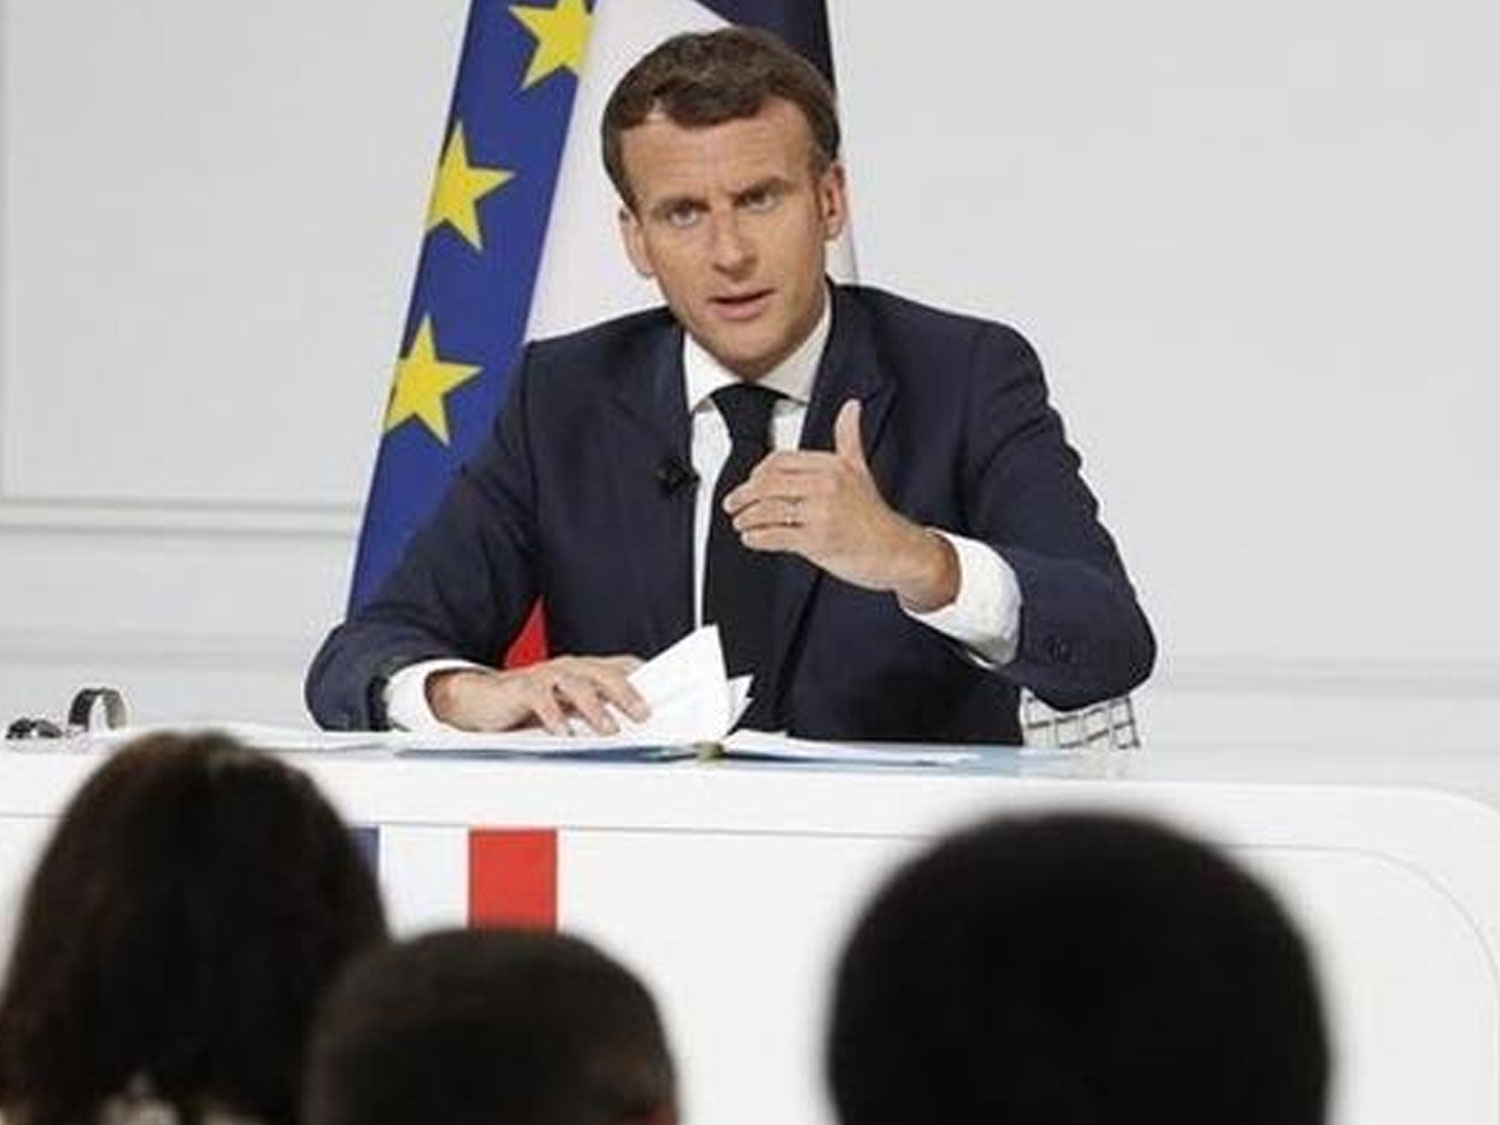 France's Macron Urges G-7 To Sell Gold Reserves To Fund Bailout For Africa